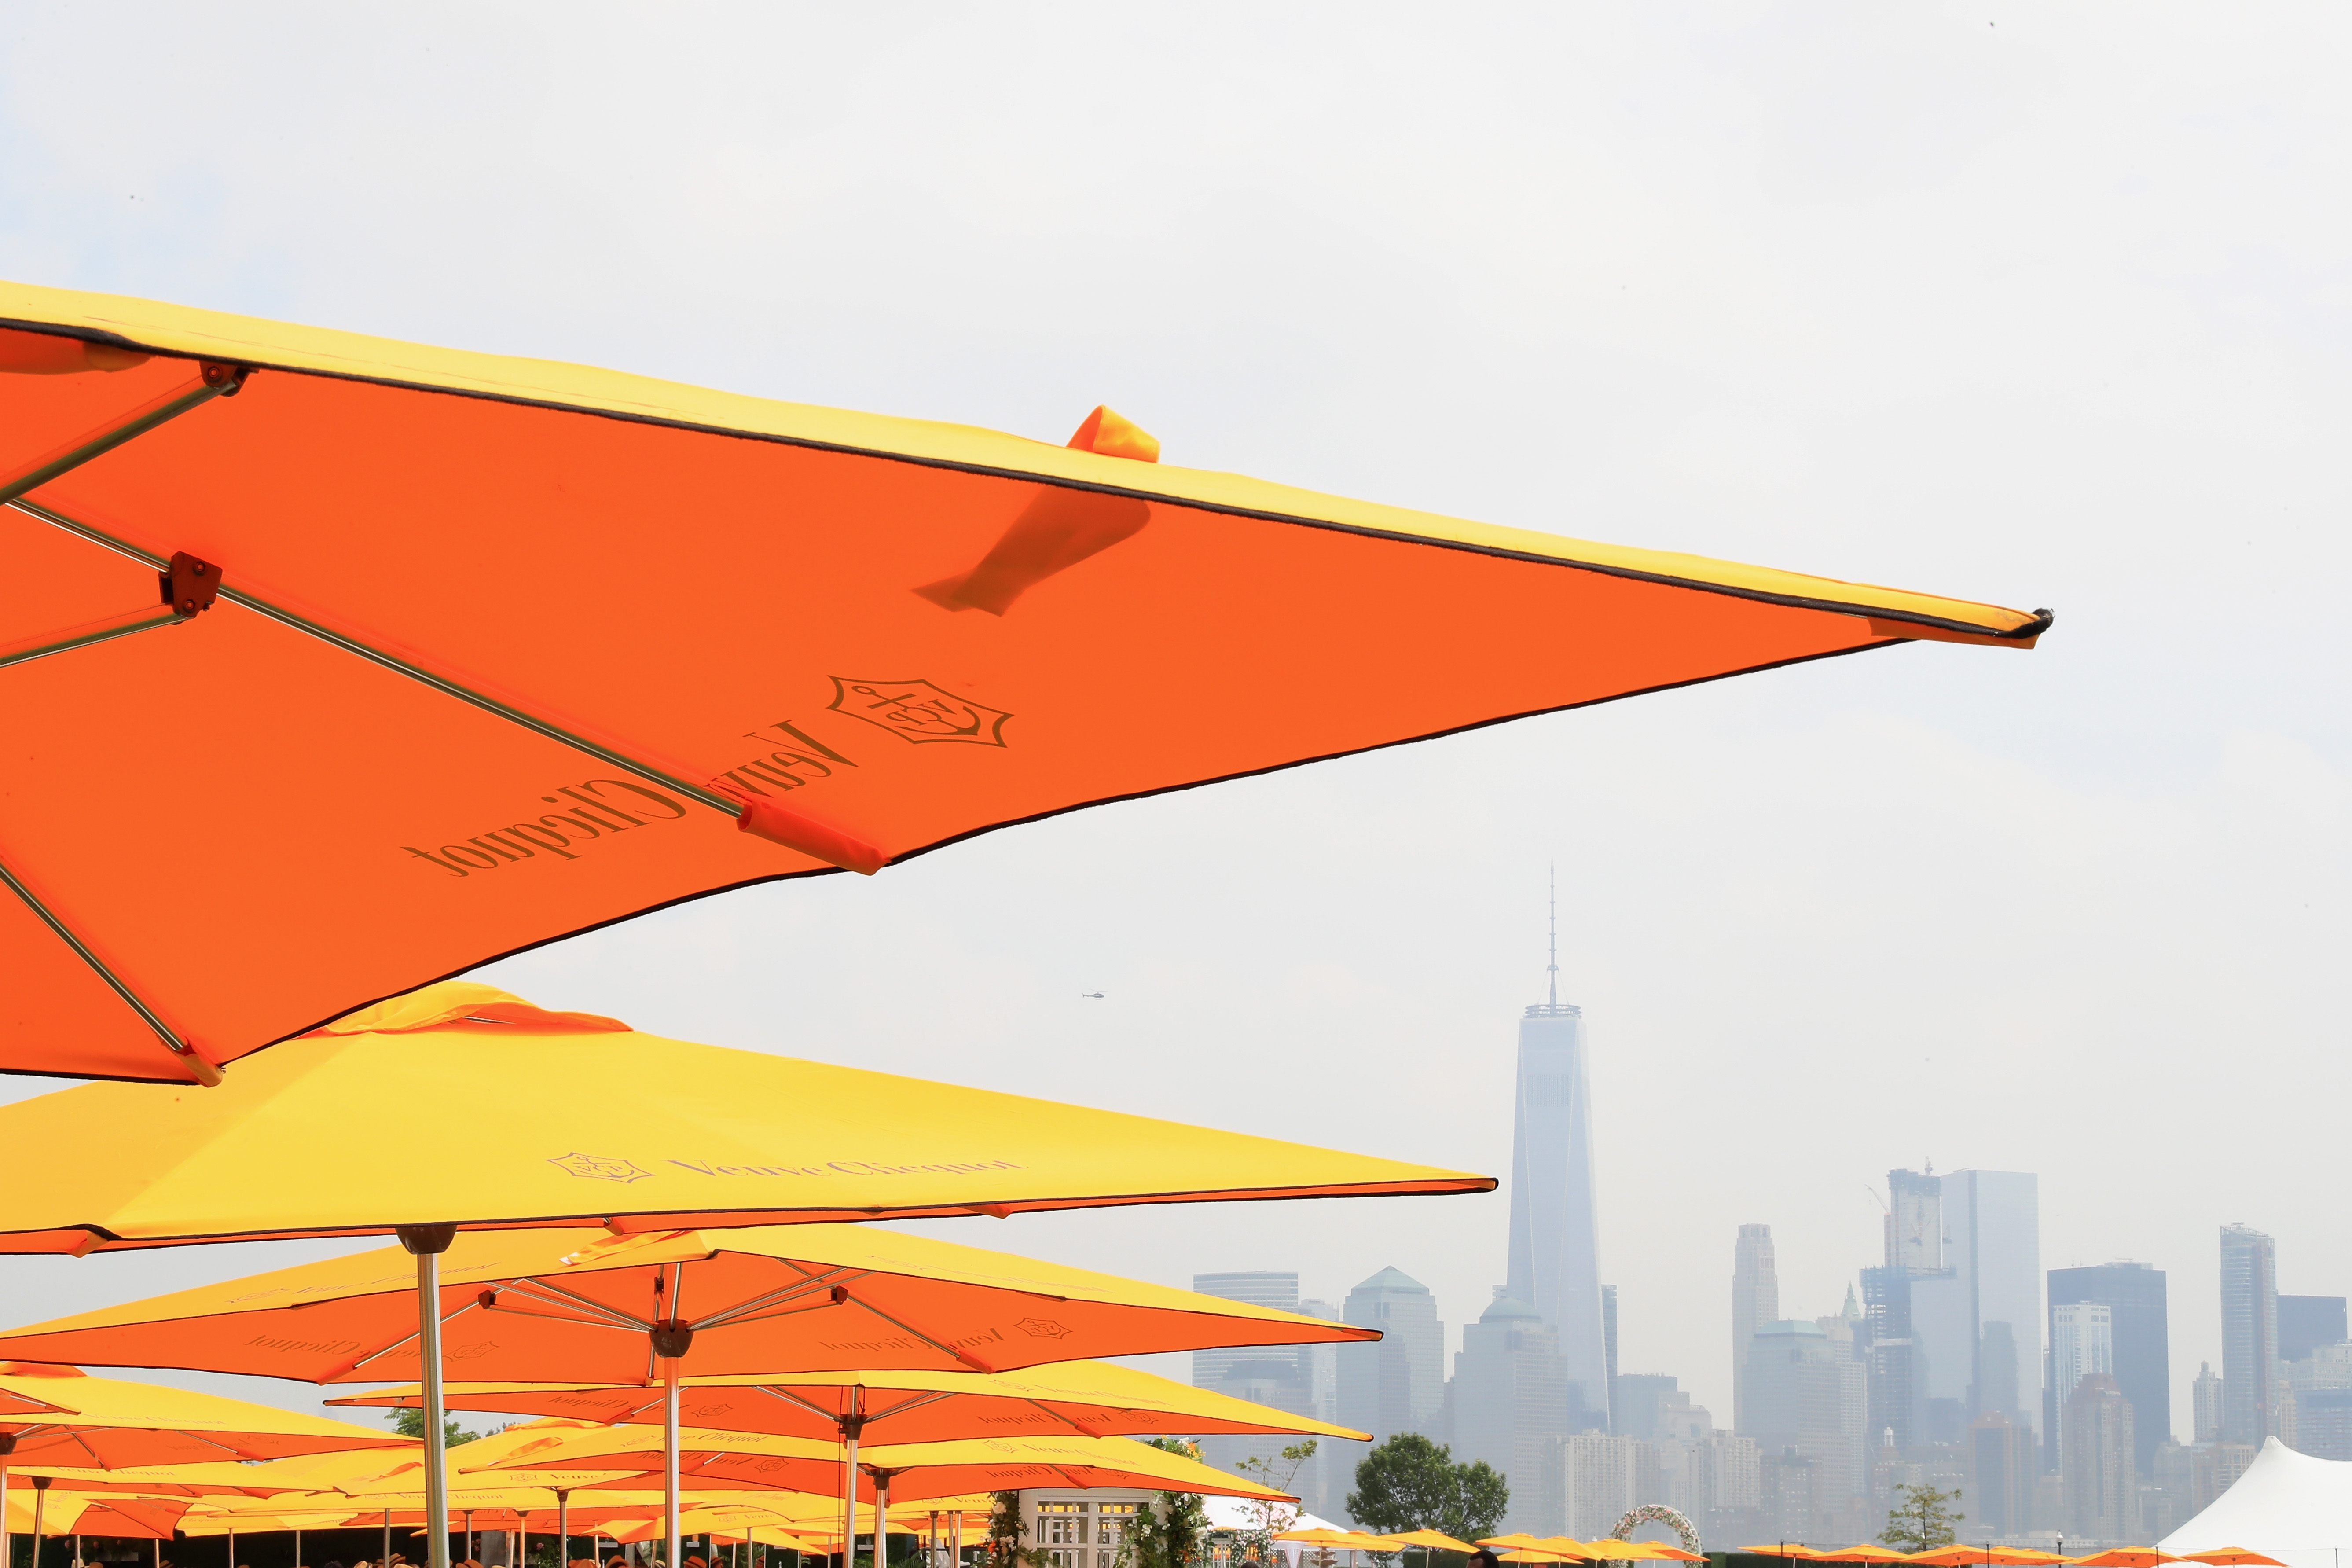 JERSEY CITY, NJ - JUNE 04:  Veuve Clicquot signage on display at the Ninth Annual Veuve Clicquot Polo Classic at Liberty State Park on June 4, 2016 in Jersey City, New Jersey.  (Photo by Neilson Barnard/Getty Images for Veuve Clicquot)